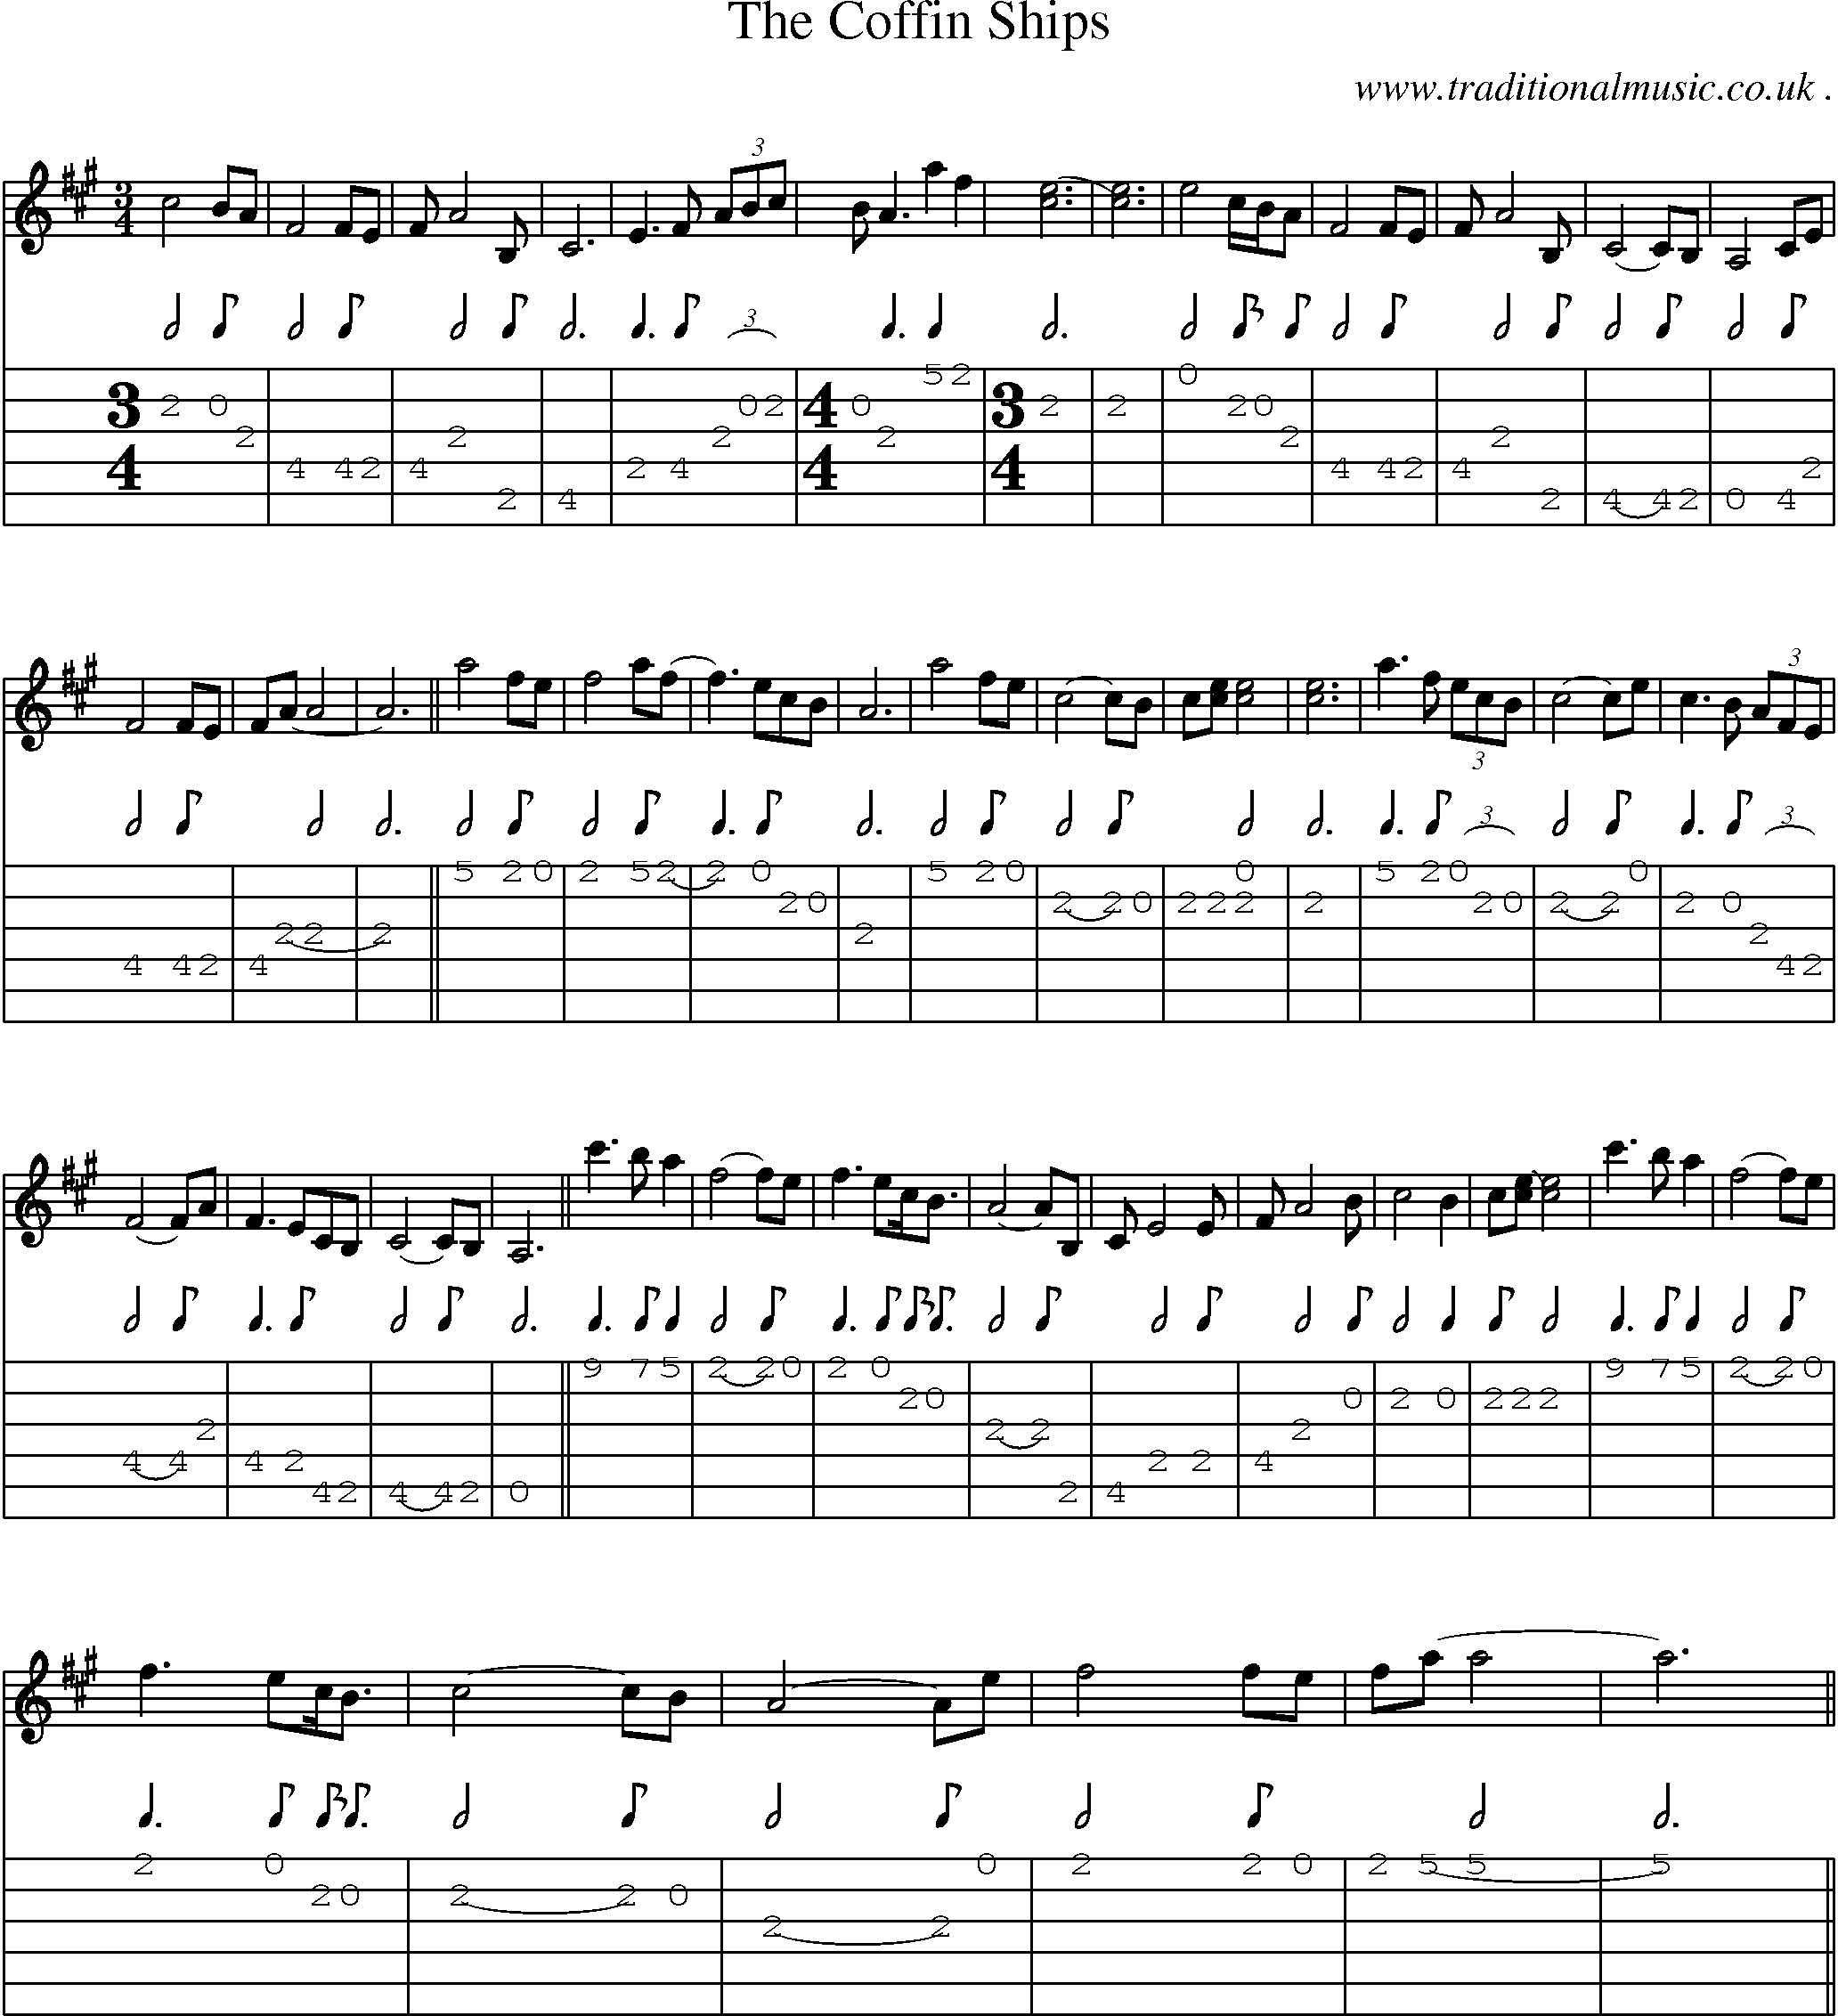 Sheet-Music and Guitar Tabs for The Coffin Ships